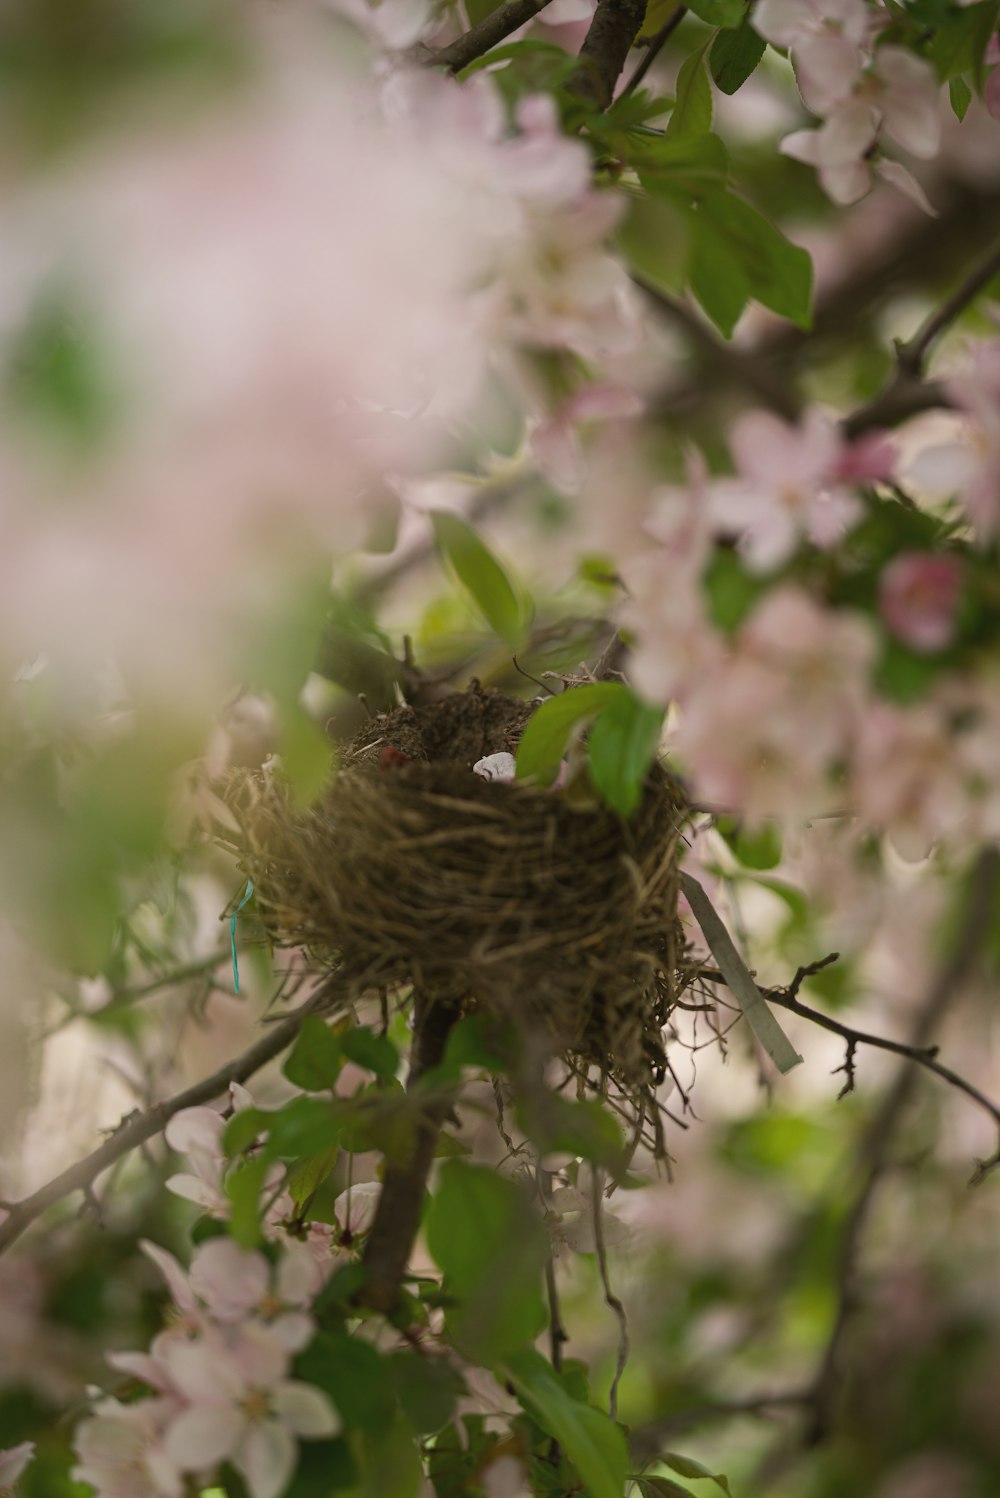 a bird's nest in a tree with pink flowers